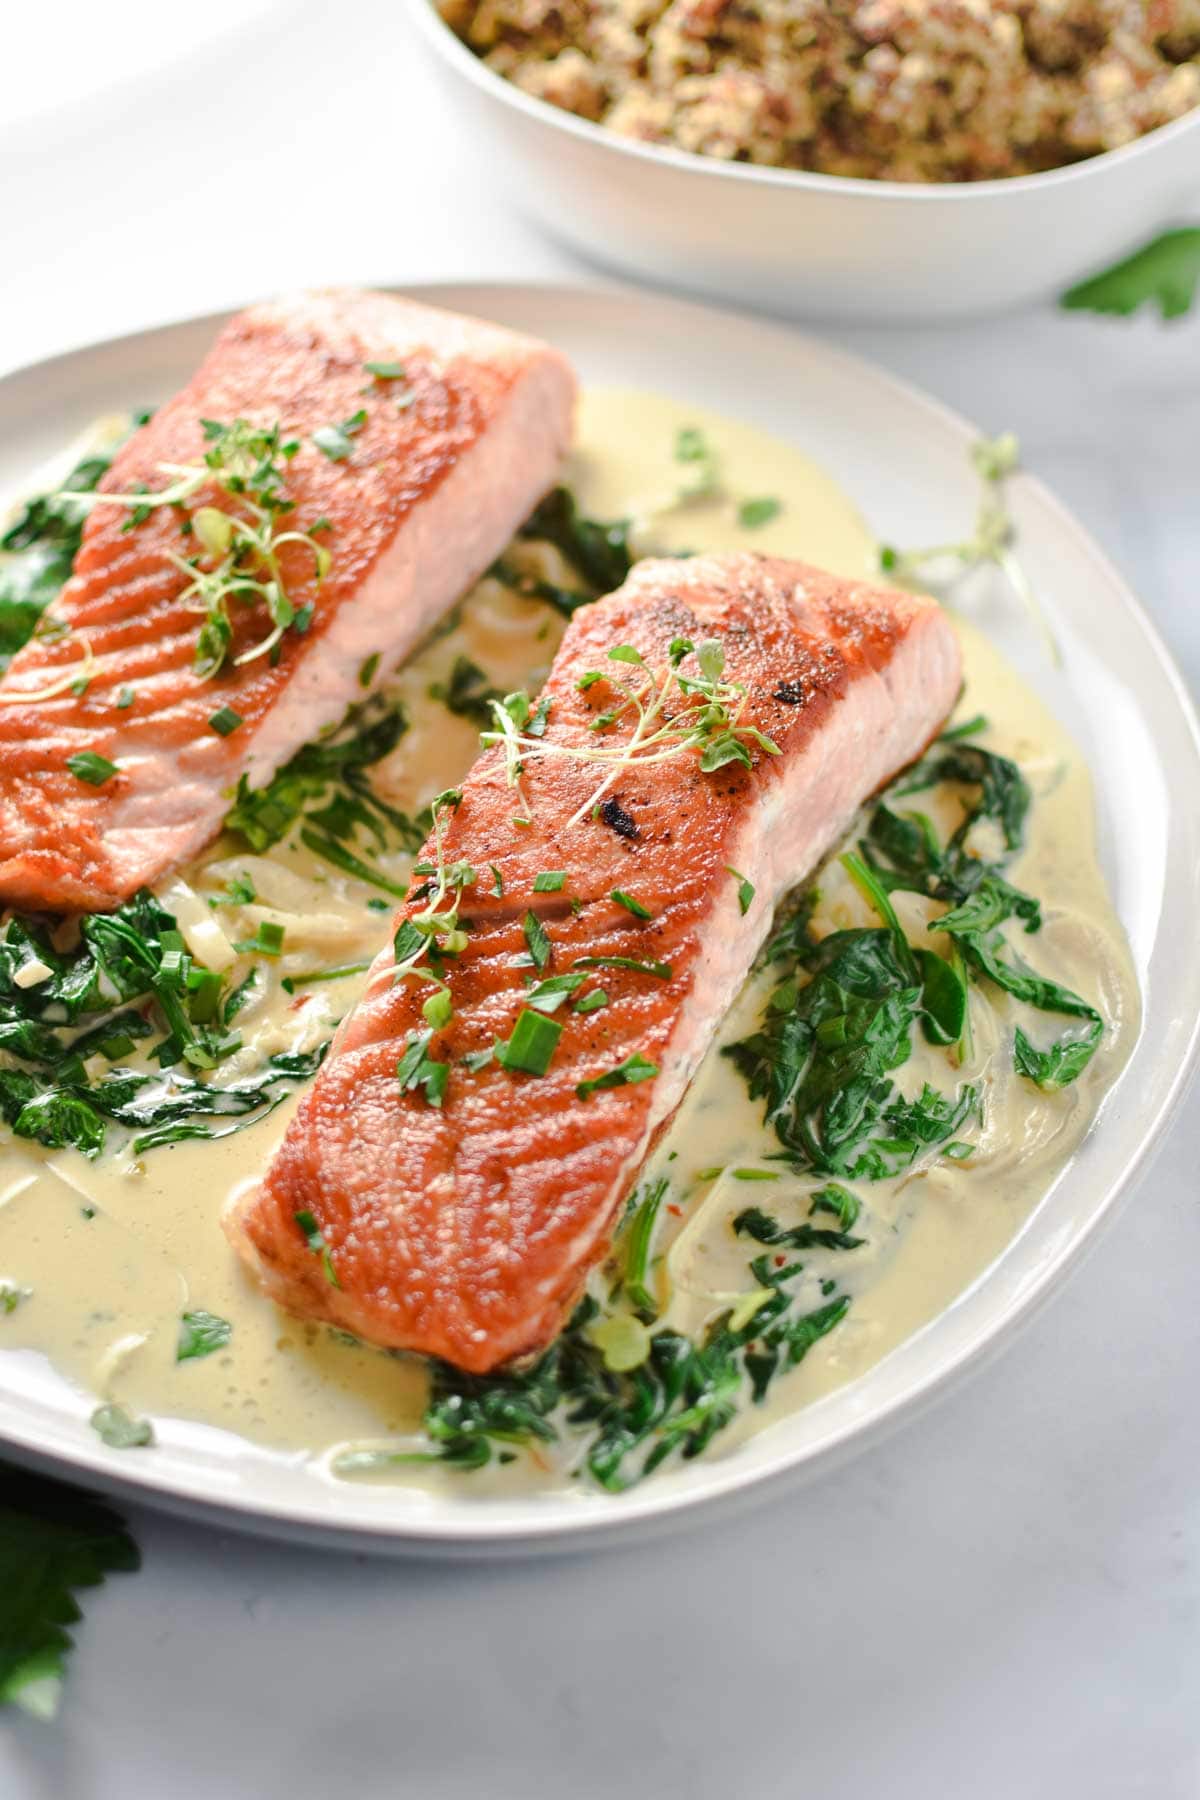 Salmon on a plate topped with parsley and microgreens